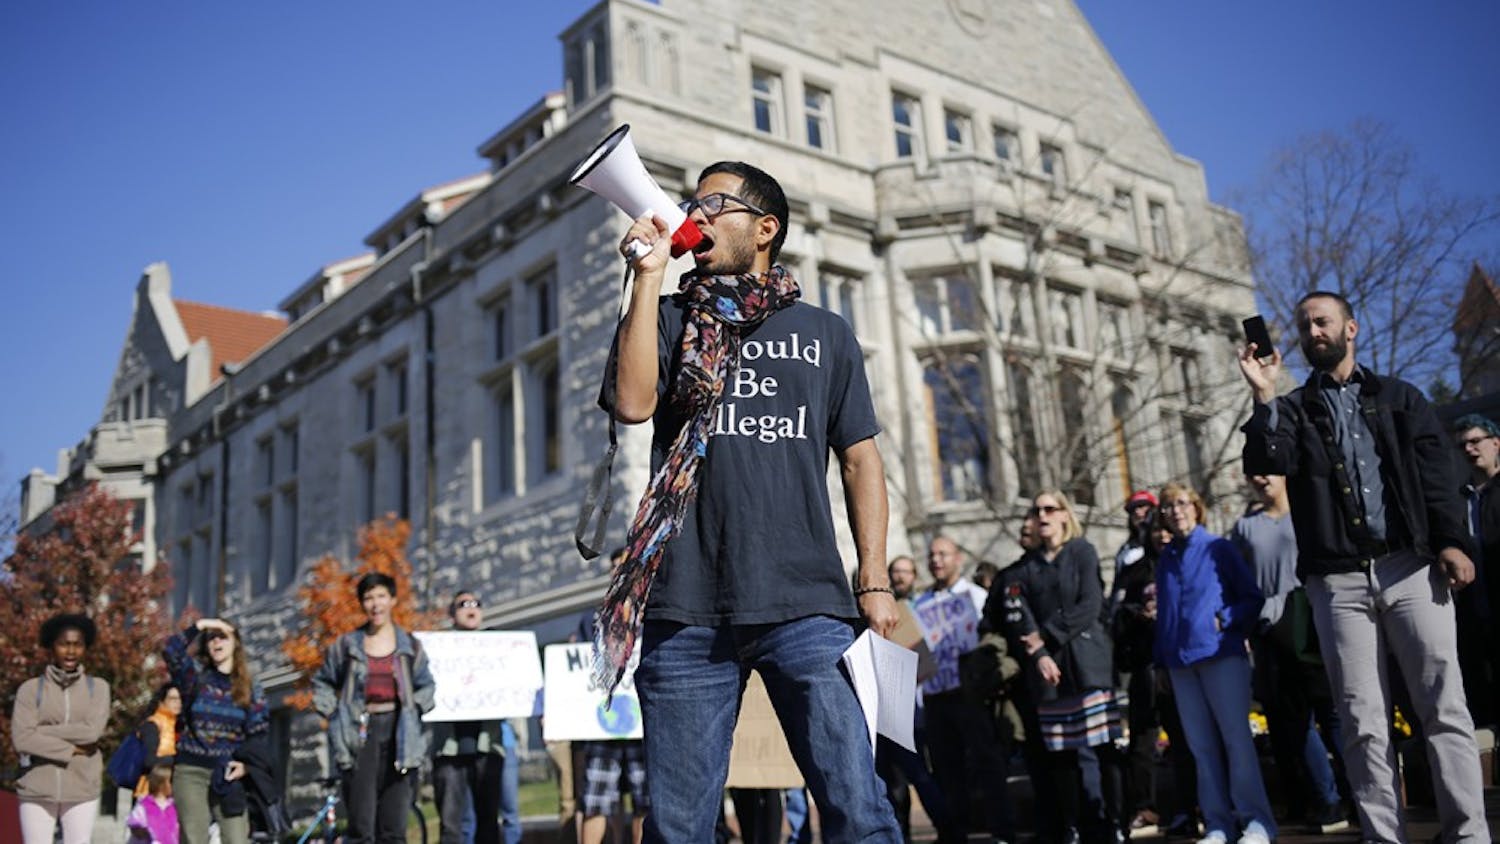 Willy Palomo yells into a megaphone while leading a group of students in a chant during a rally for a Sanctuary Campus Wednesday at Sample Gates. Palomo is with the UndocuHoosier Alliance and was rallying to bring awareness to isues facing undocumented students on IU's campus. "Hoosier Promise," he yelled. "Is a lie," the crowd followed up. "Only true," he yelled out again. "If you're white," the crowd finished. 